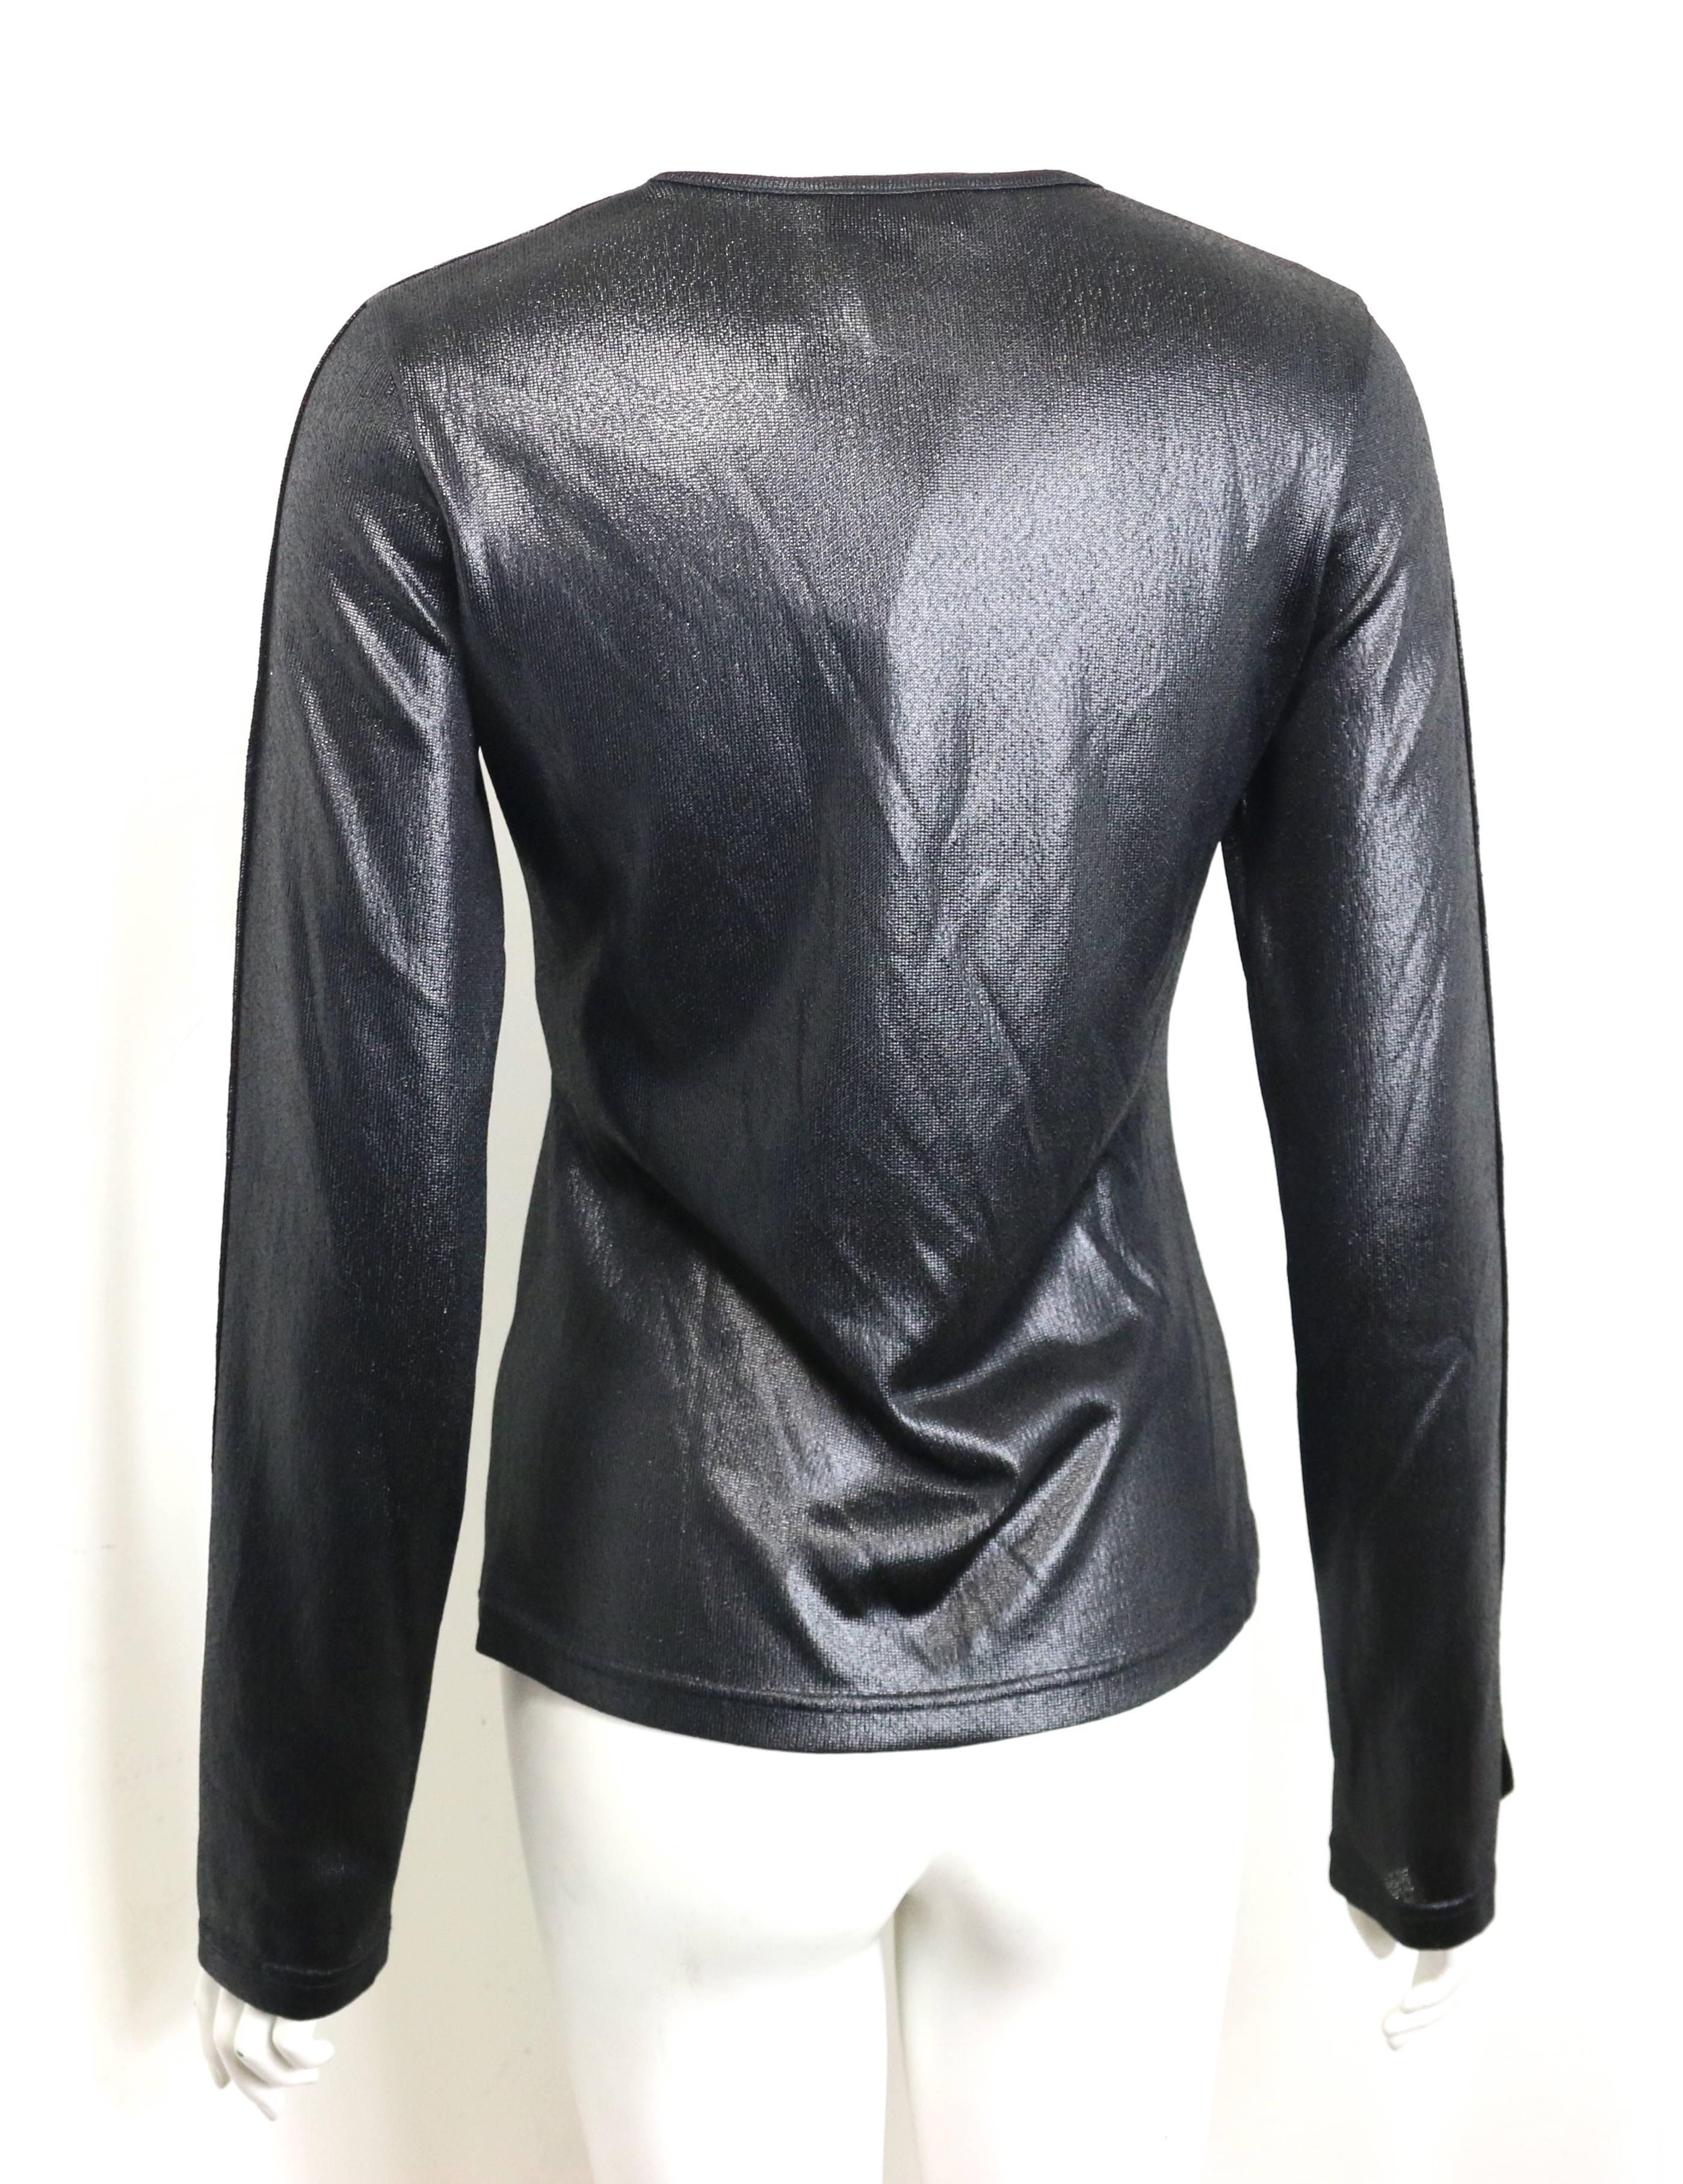 Gucci by Tom Ford Black Polyester Long Sleeves Top In Excellent Condition For Sale In Sheung Wan, HK